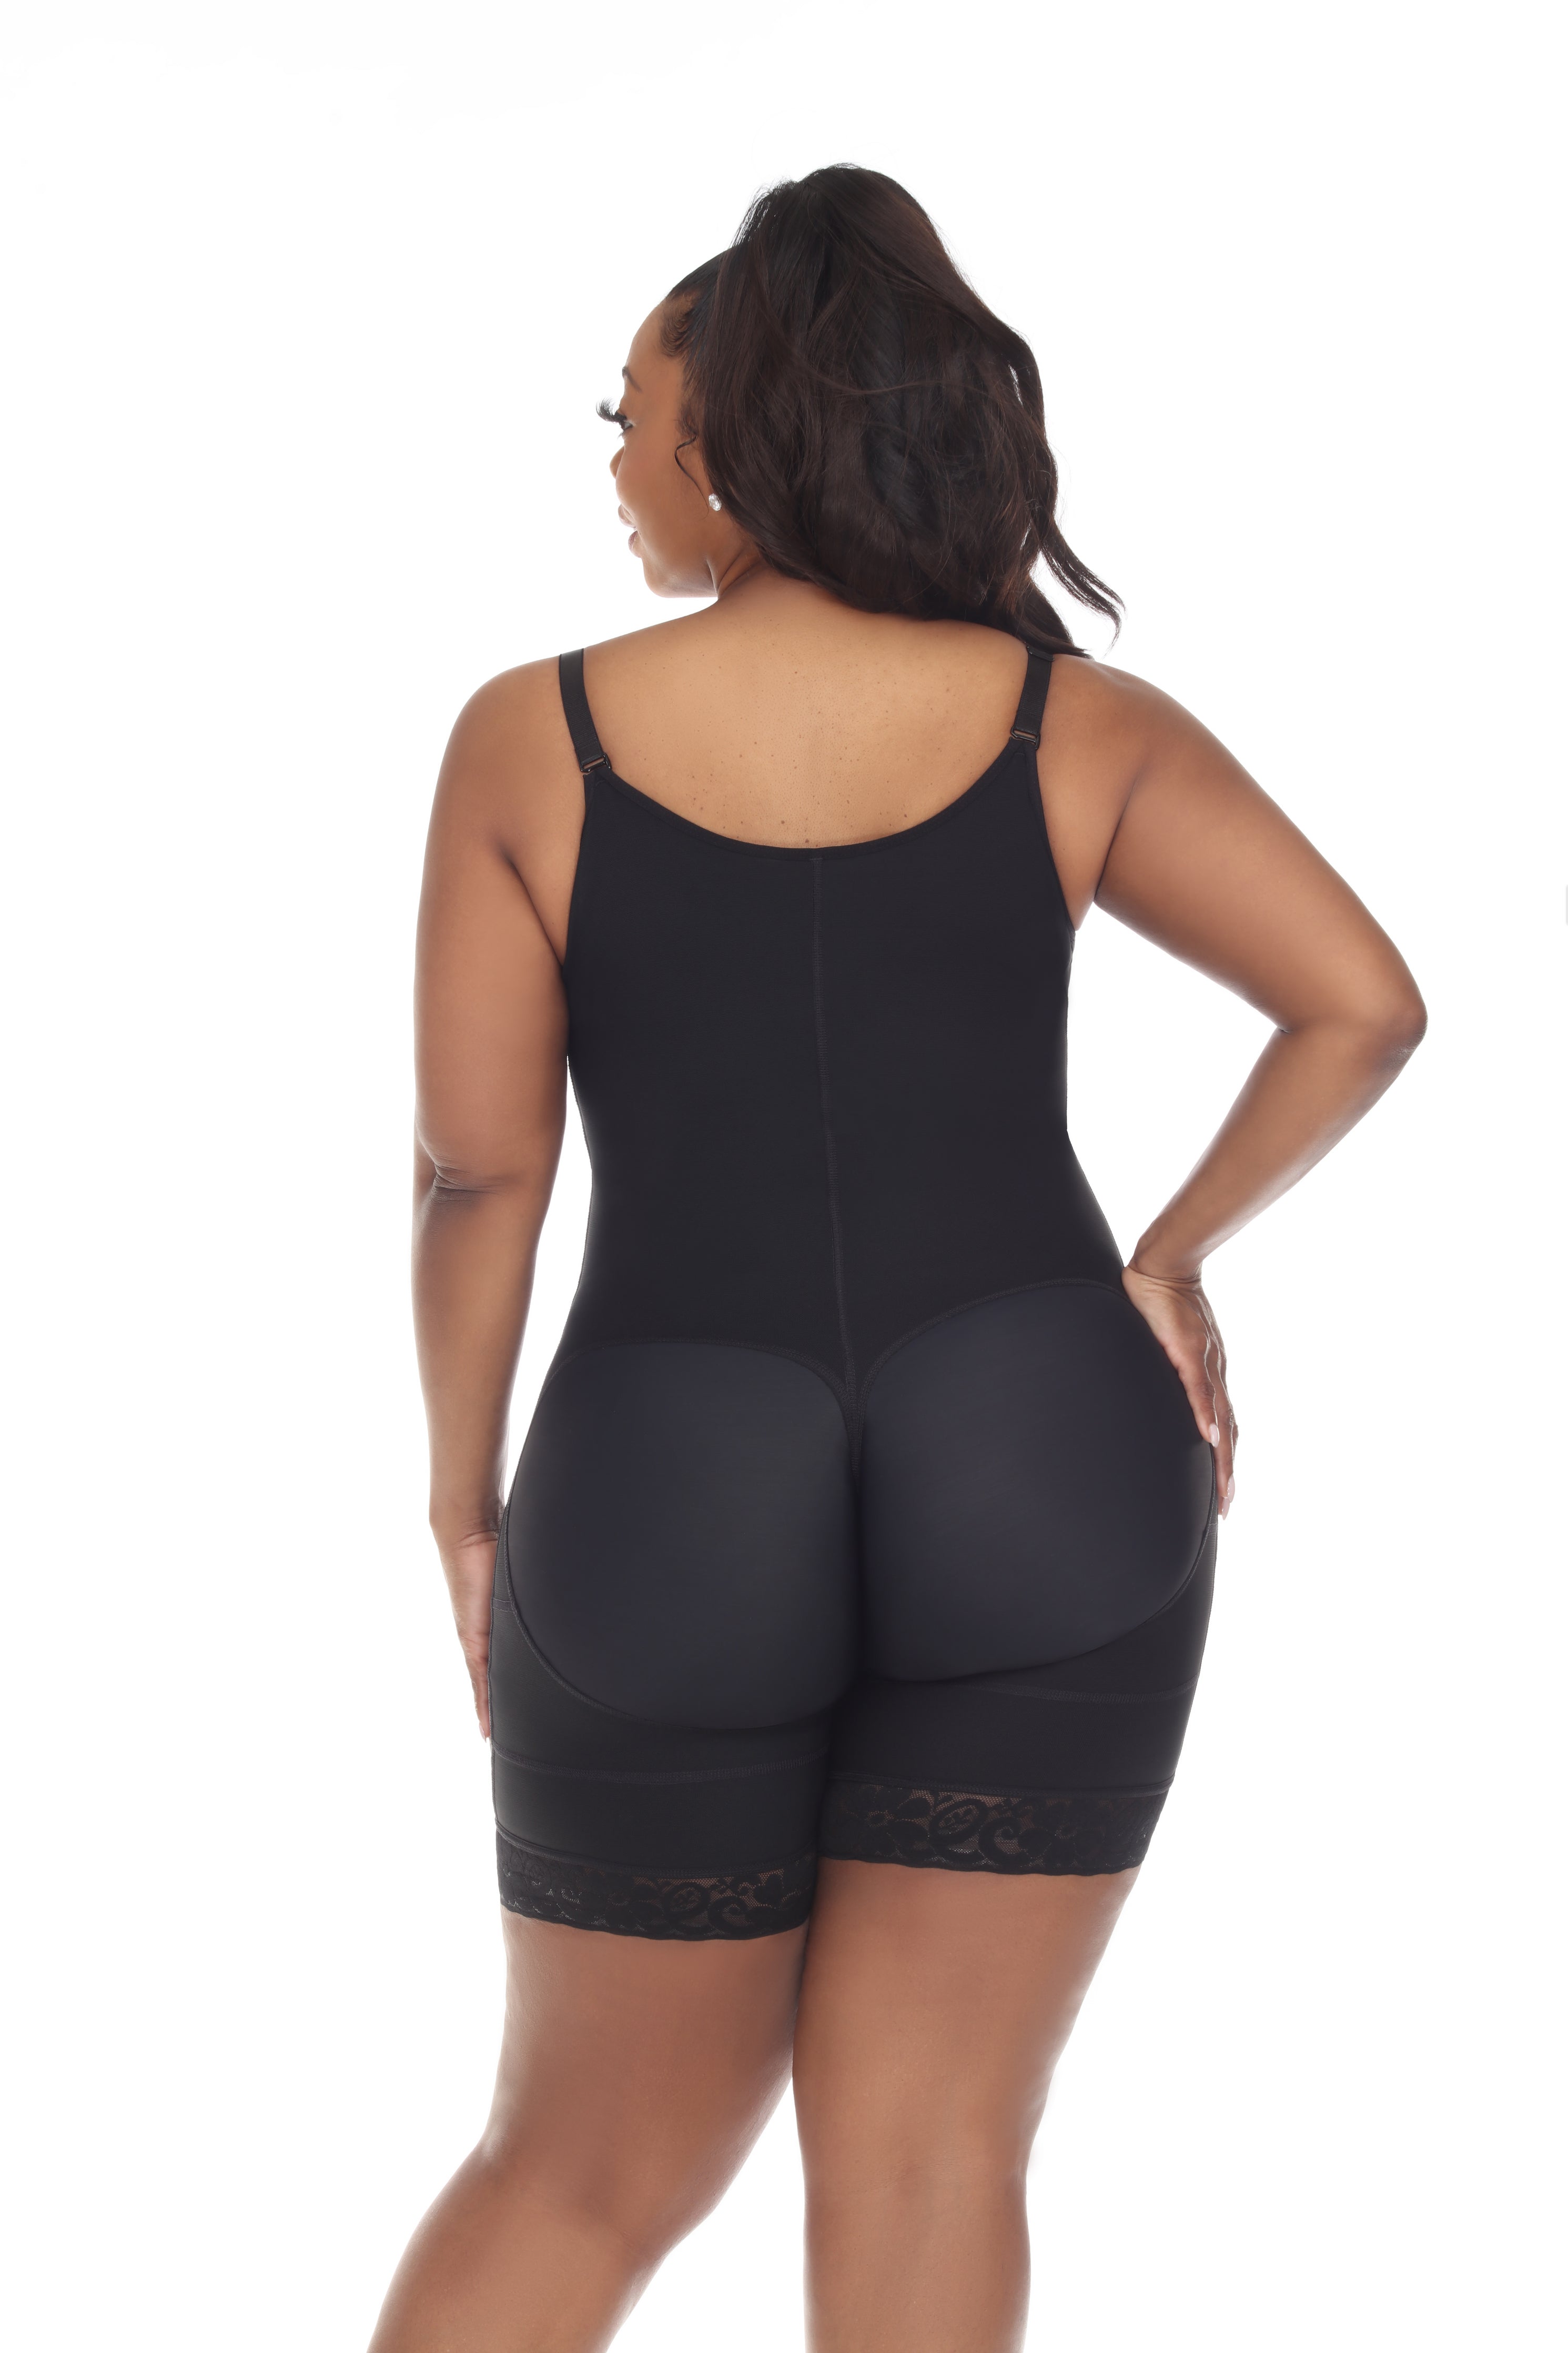 Trending Hourglass BBL Girdle with Mid Legs and Hooks